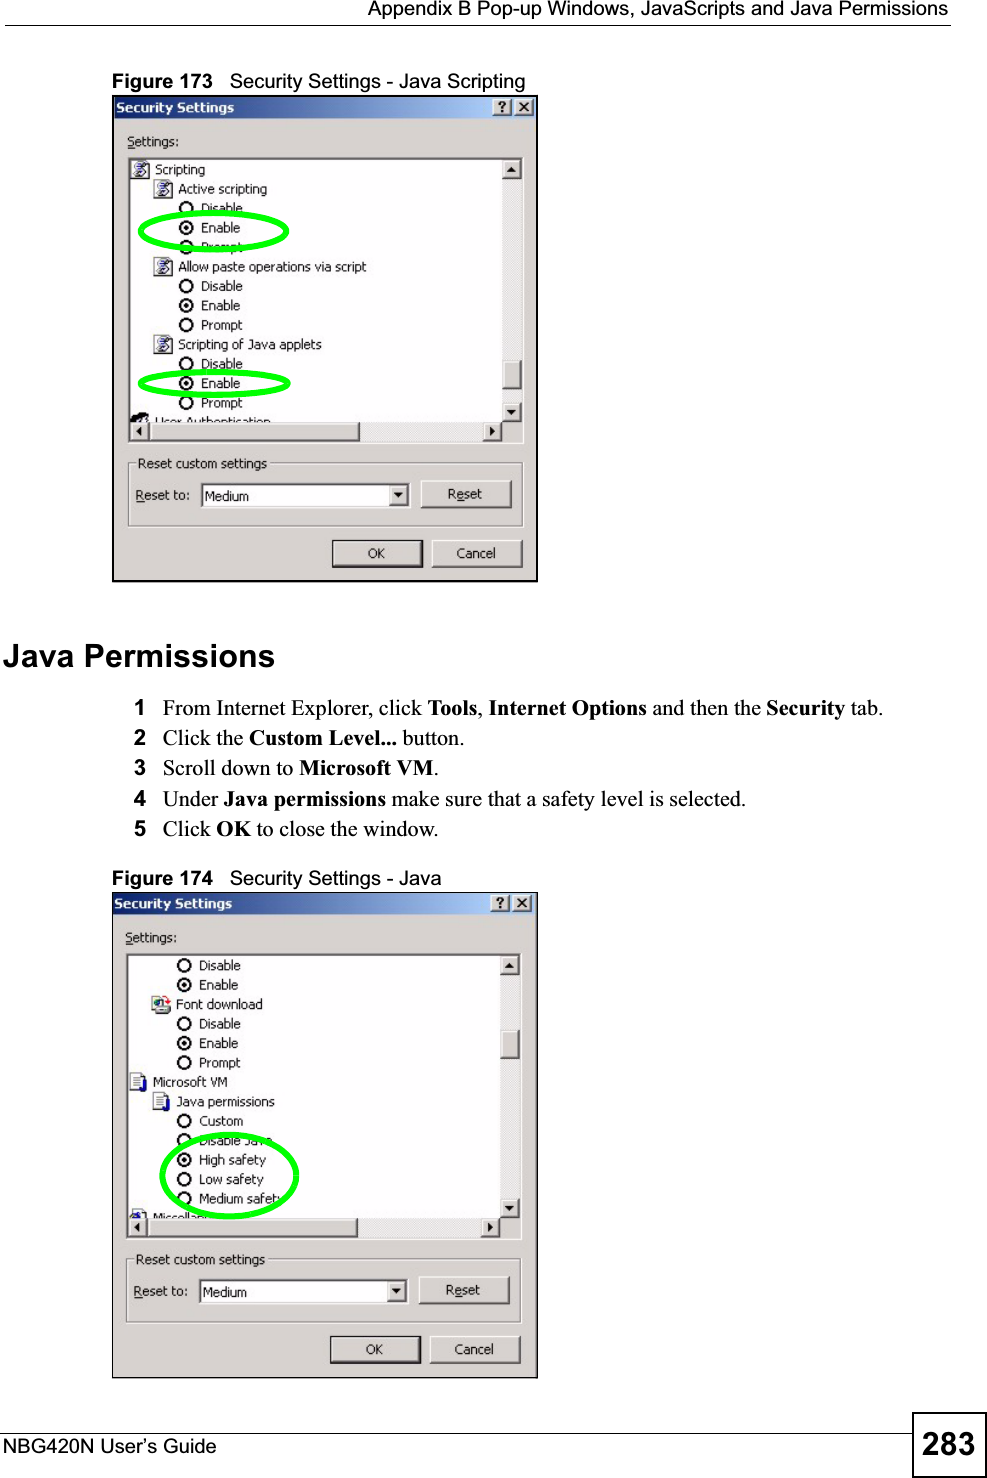  Appendix B Pop-up Windows, JavaScripts and Java PermissionsNBG420N User’s Guide 283Figure 173   Security Settings - Java ScriptingJava Permissions1From Internet Explorer, click Tools,Internet Options and then the Security tab. 2Click the Custom Level... button. 3Scroll down to Microsoft VM.4Under Java permissions make sure that a safety level is selected.5Click OK to close the window.Figure 174   Security Settings - Java 